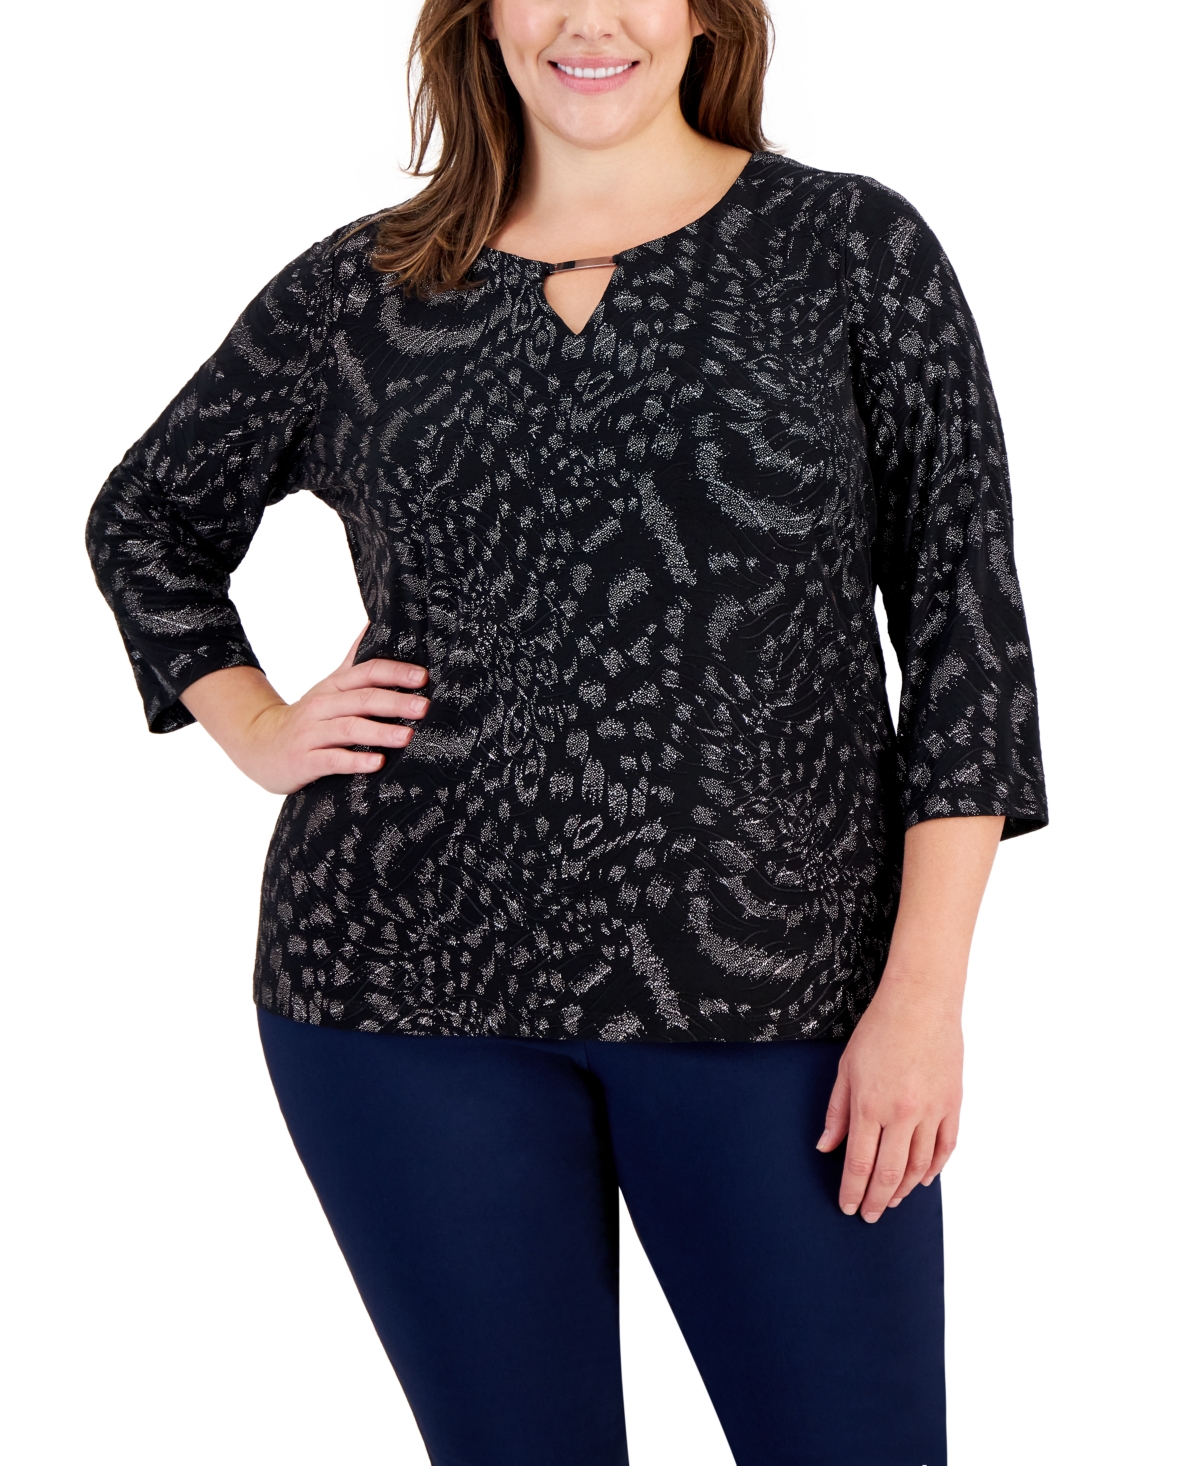 Jm Collection Plus Size Cheetah Glitter Keyhole Top, Created for Macy's